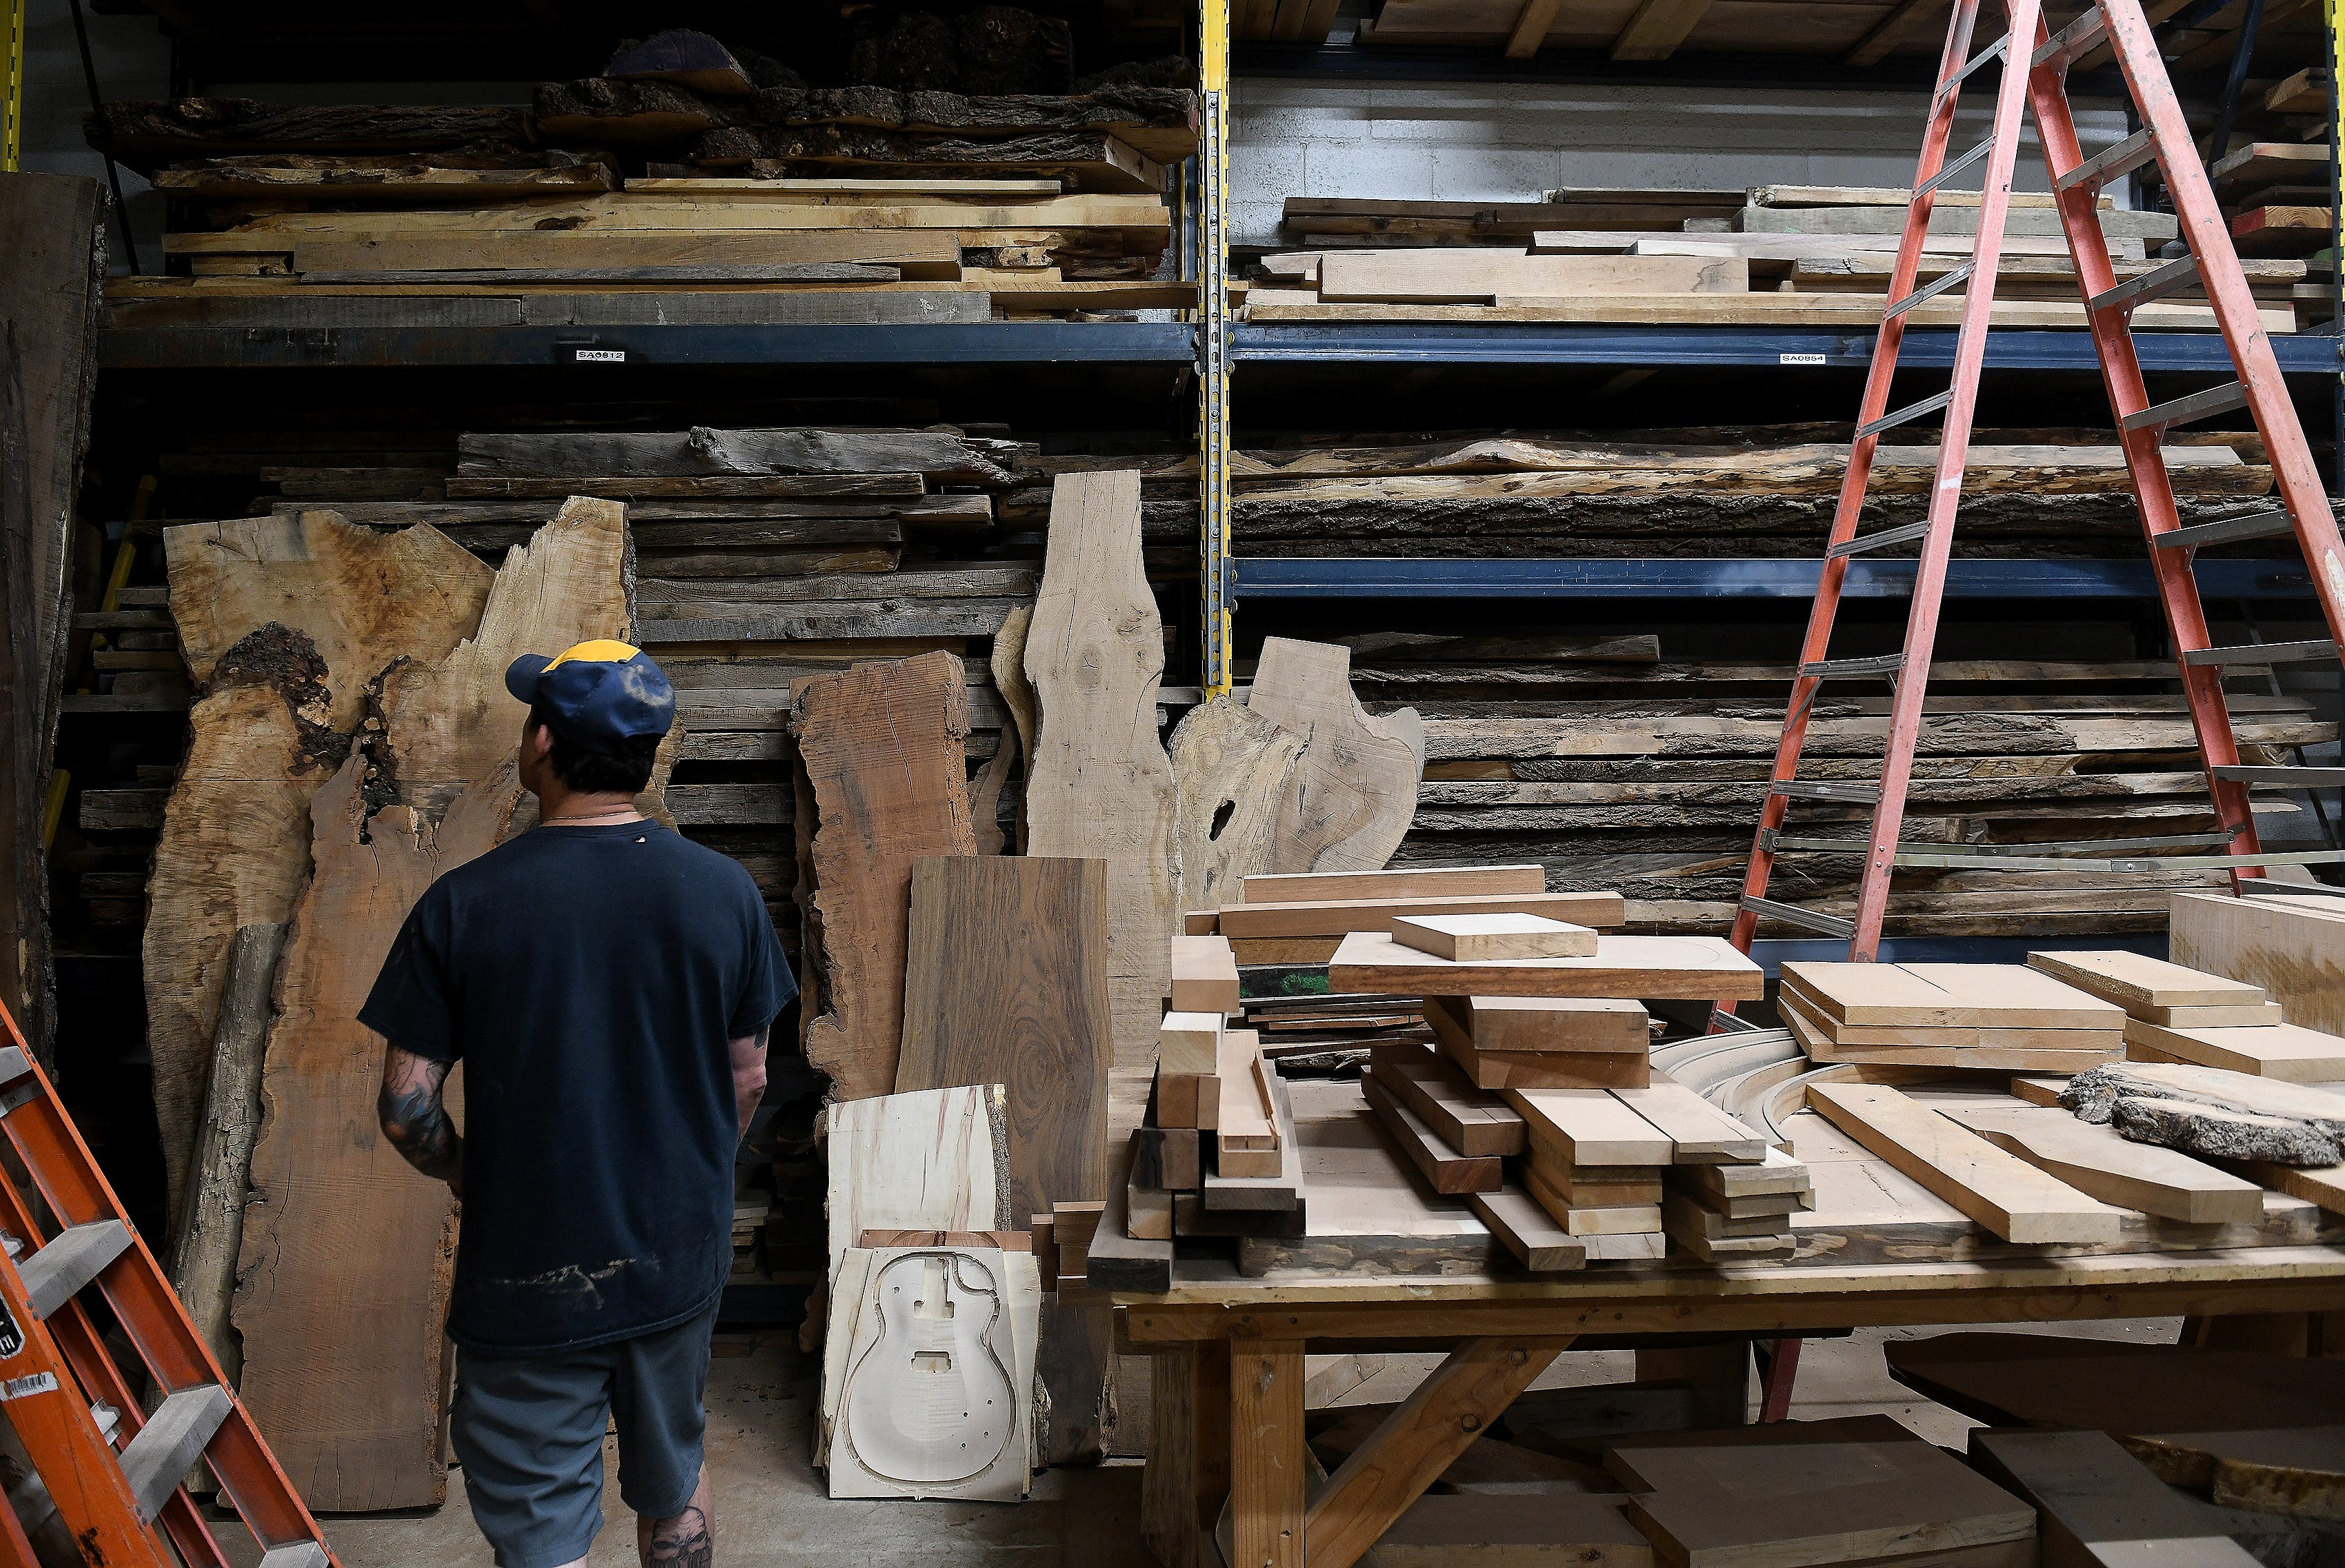 Gabriel Currie looks over some of the wood on the shelves in his Echopark Guitars headquarters in Detroit on July 21, 2023.